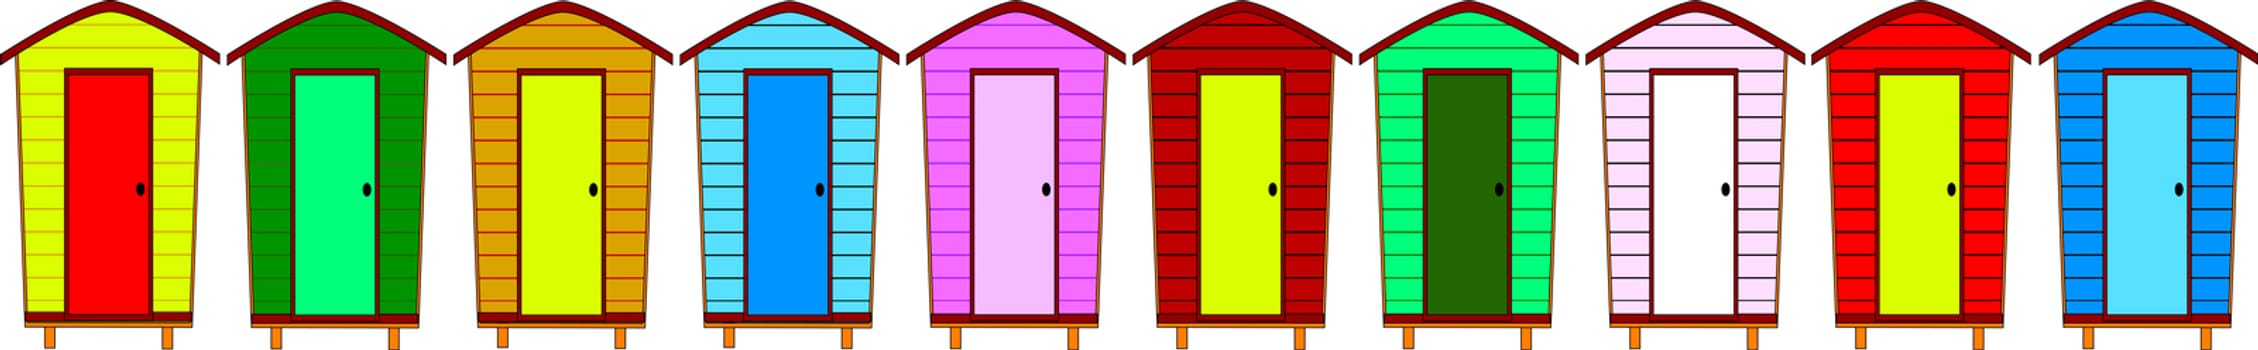 Ten beach huts, no gradients, with copy space and separately grouped.